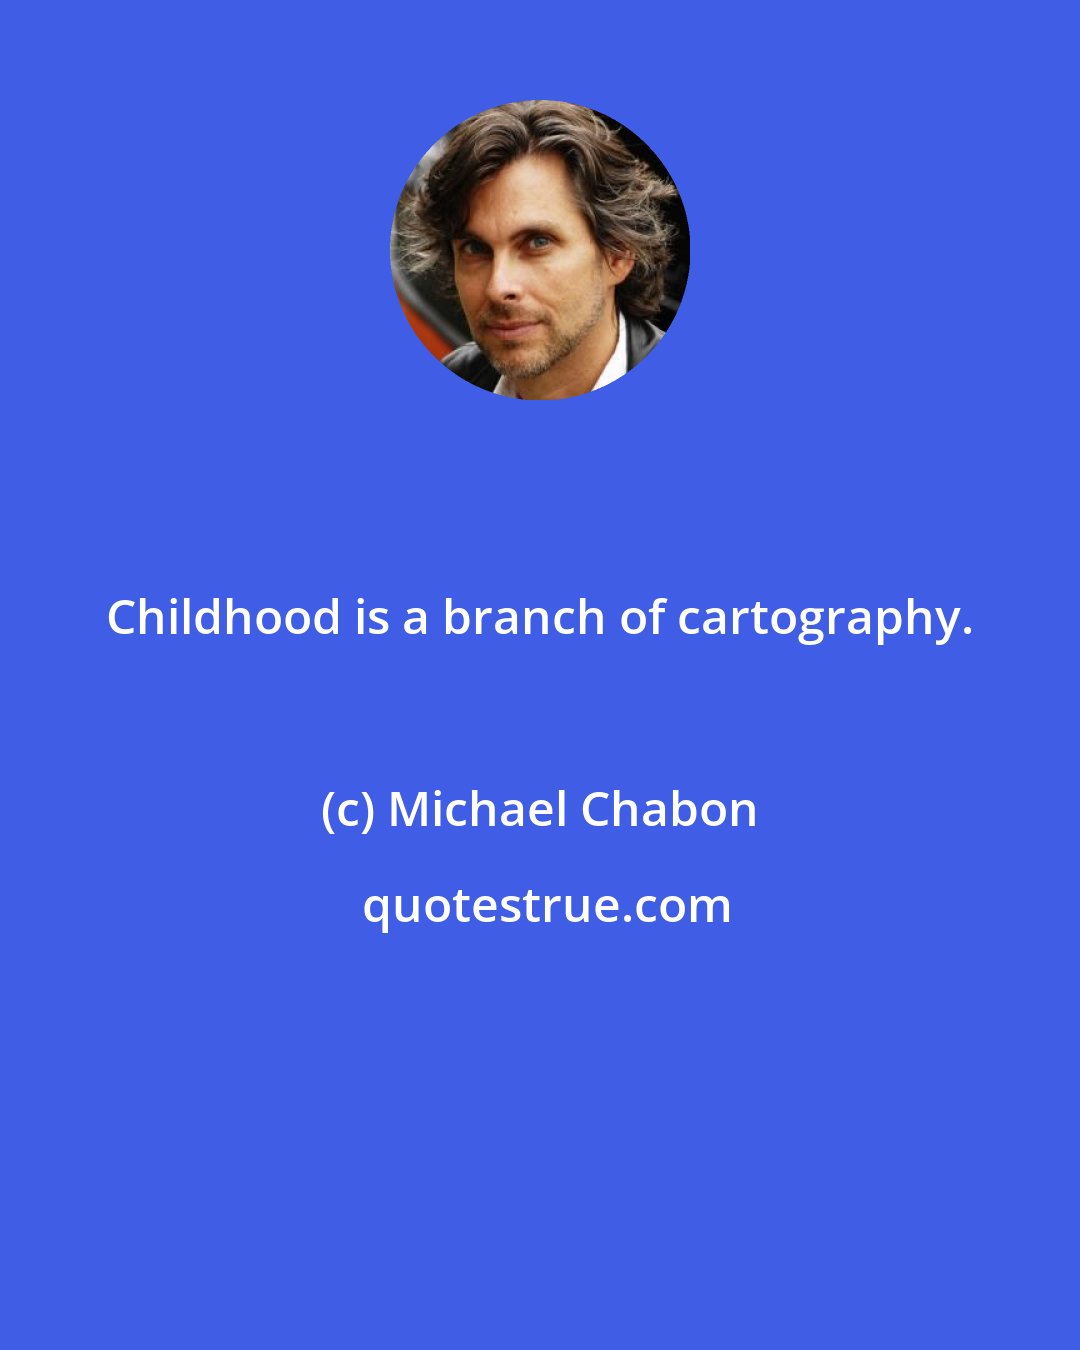 Michael Chabon: Childhood is a branch of cartography.